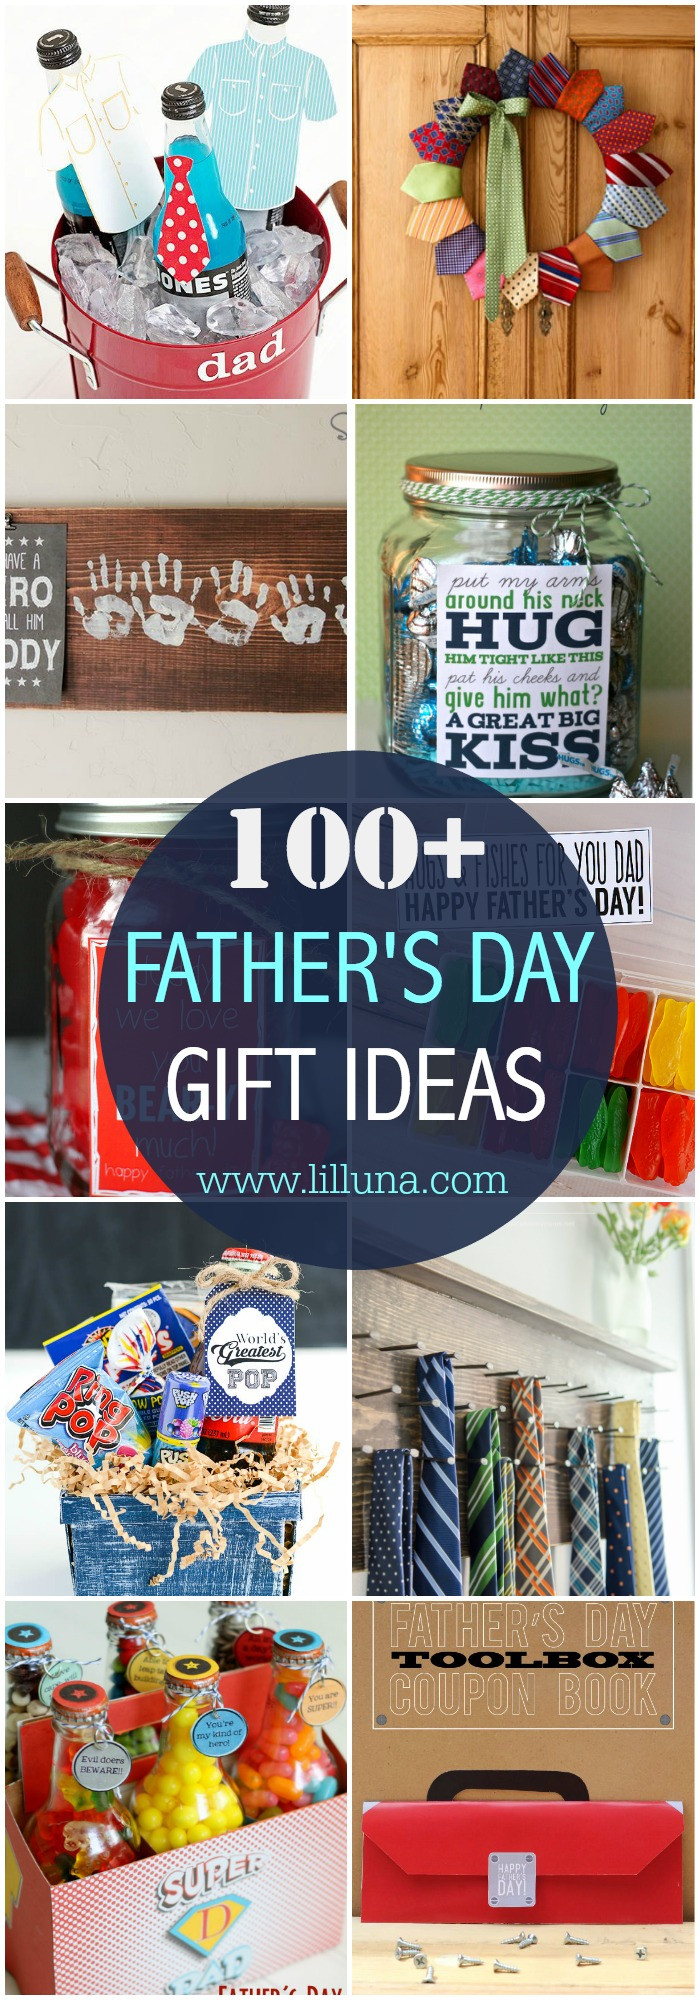 Ideas For Fathers Day Gift
 100 DIY Father s Day Gifts